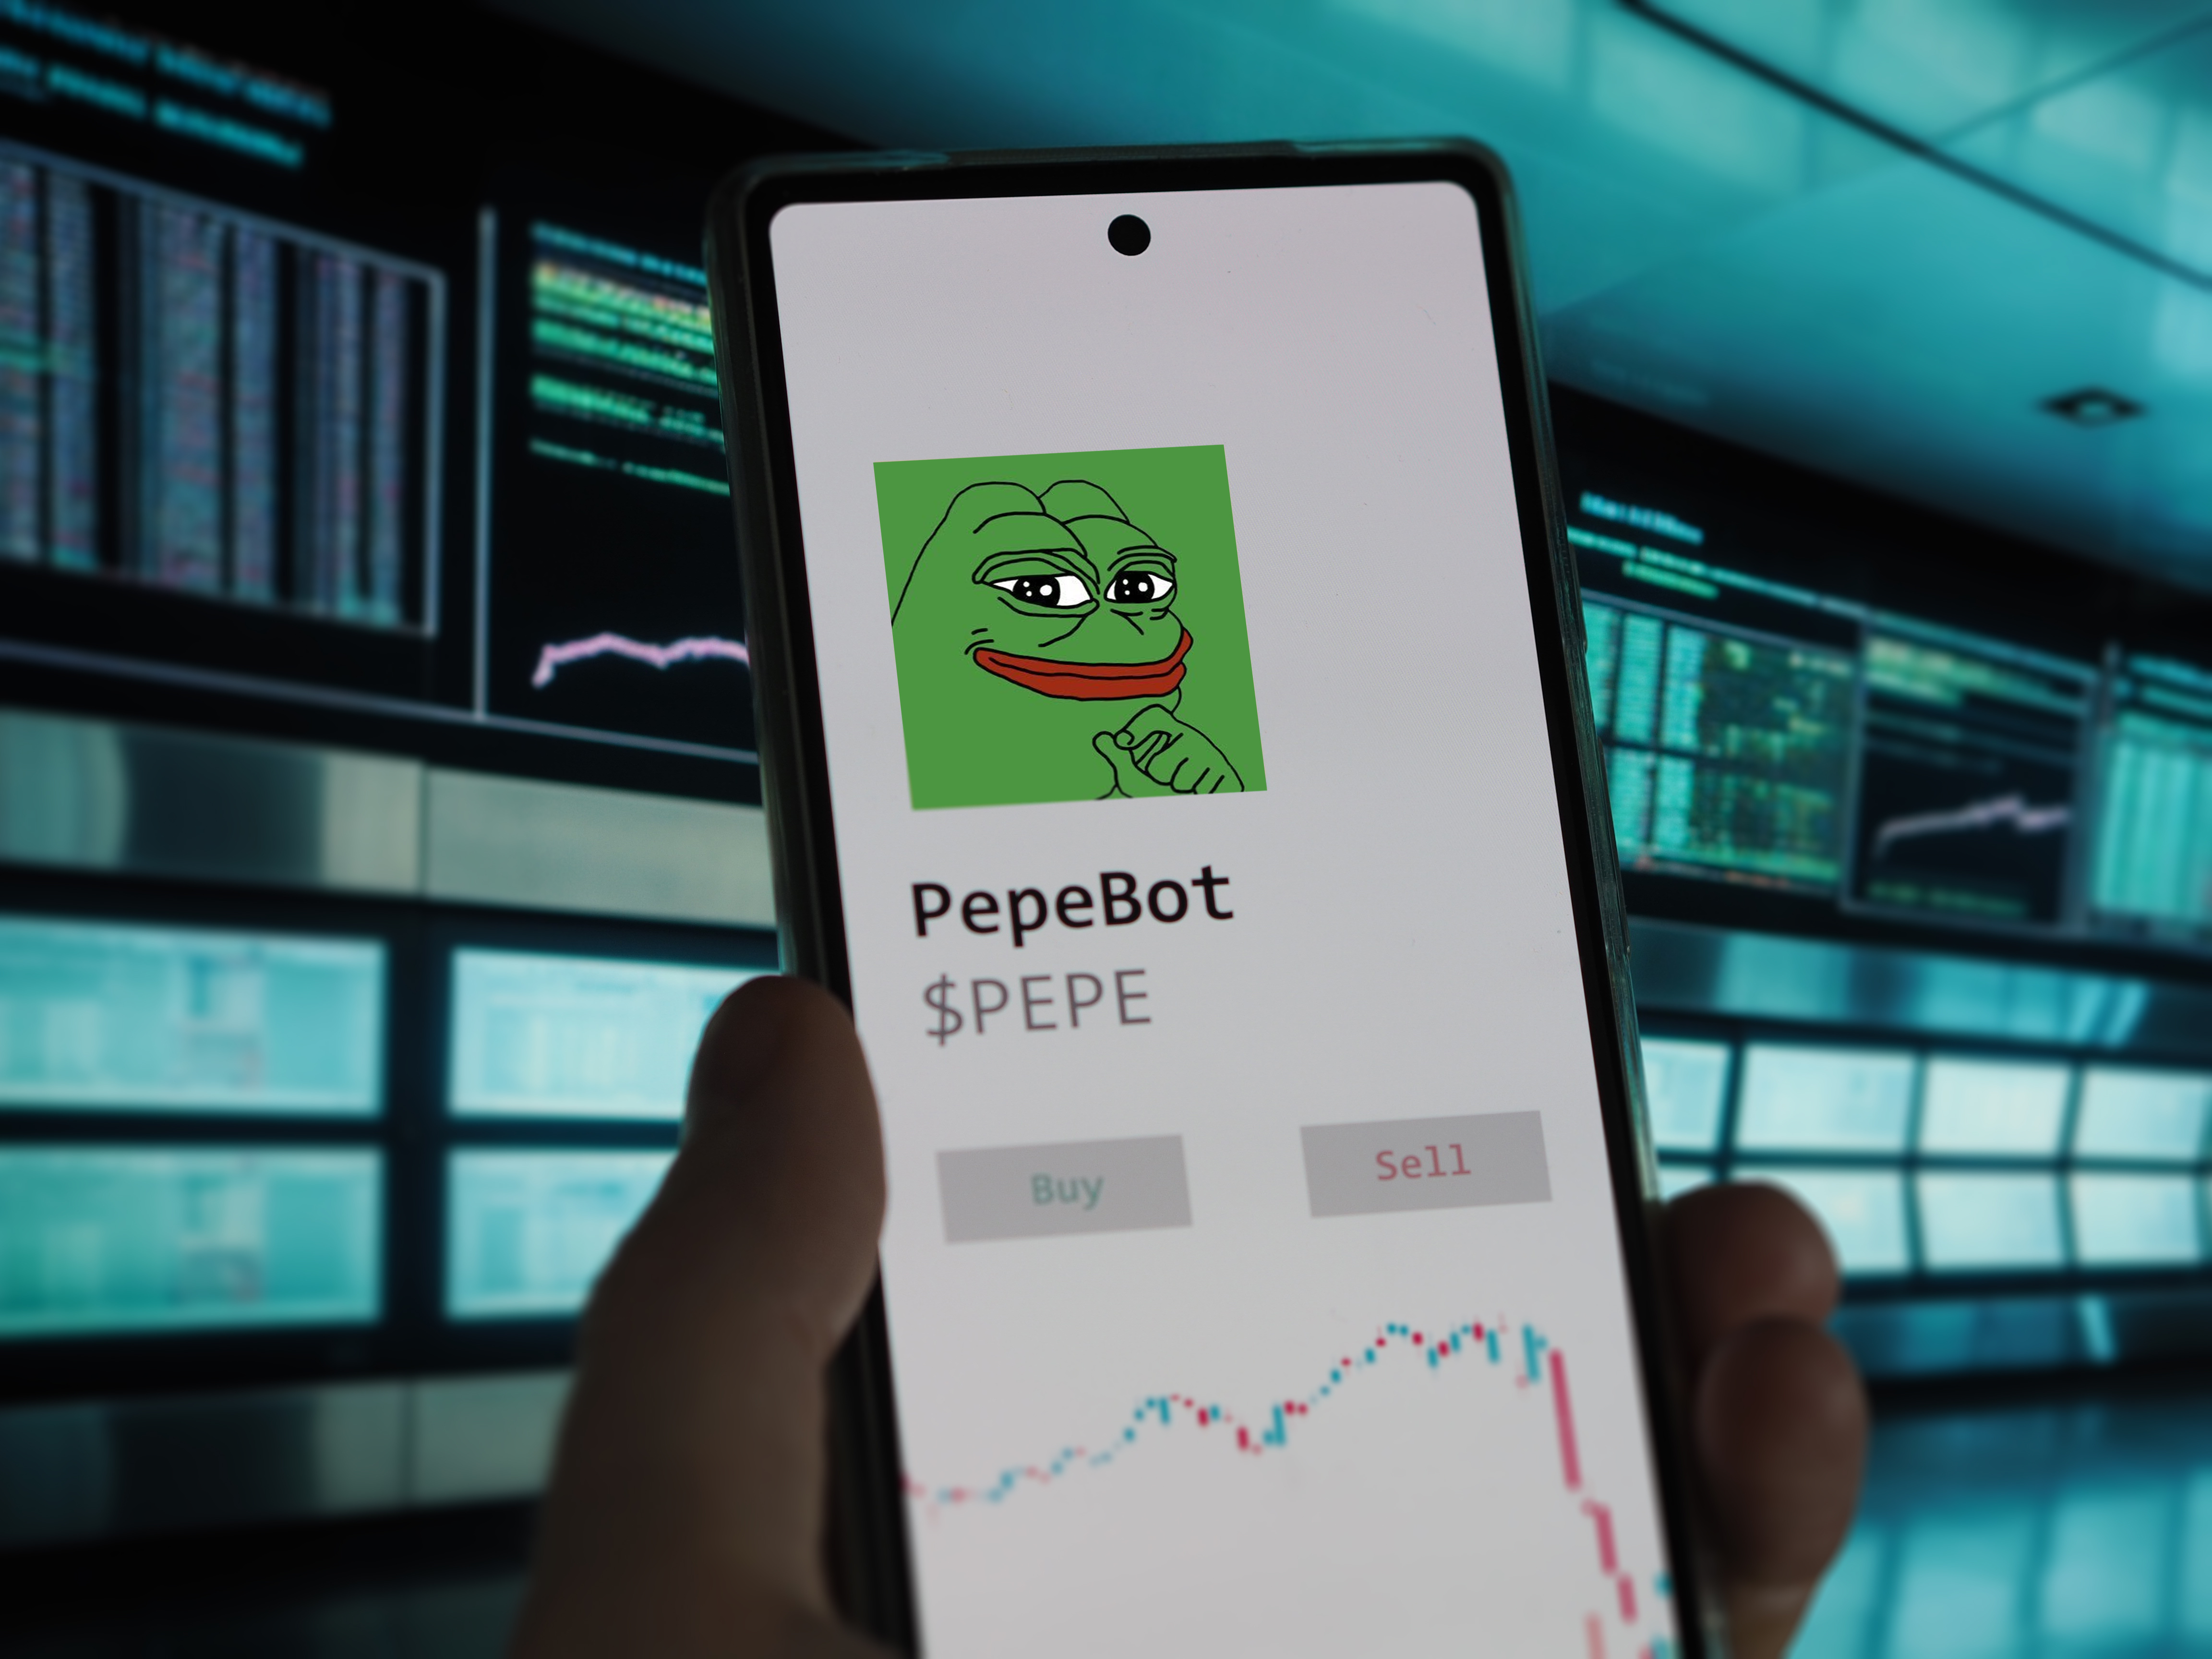 Is Pepe Coin Price Doomed? Consider Launchpad and Deelance as Top Crypto Options